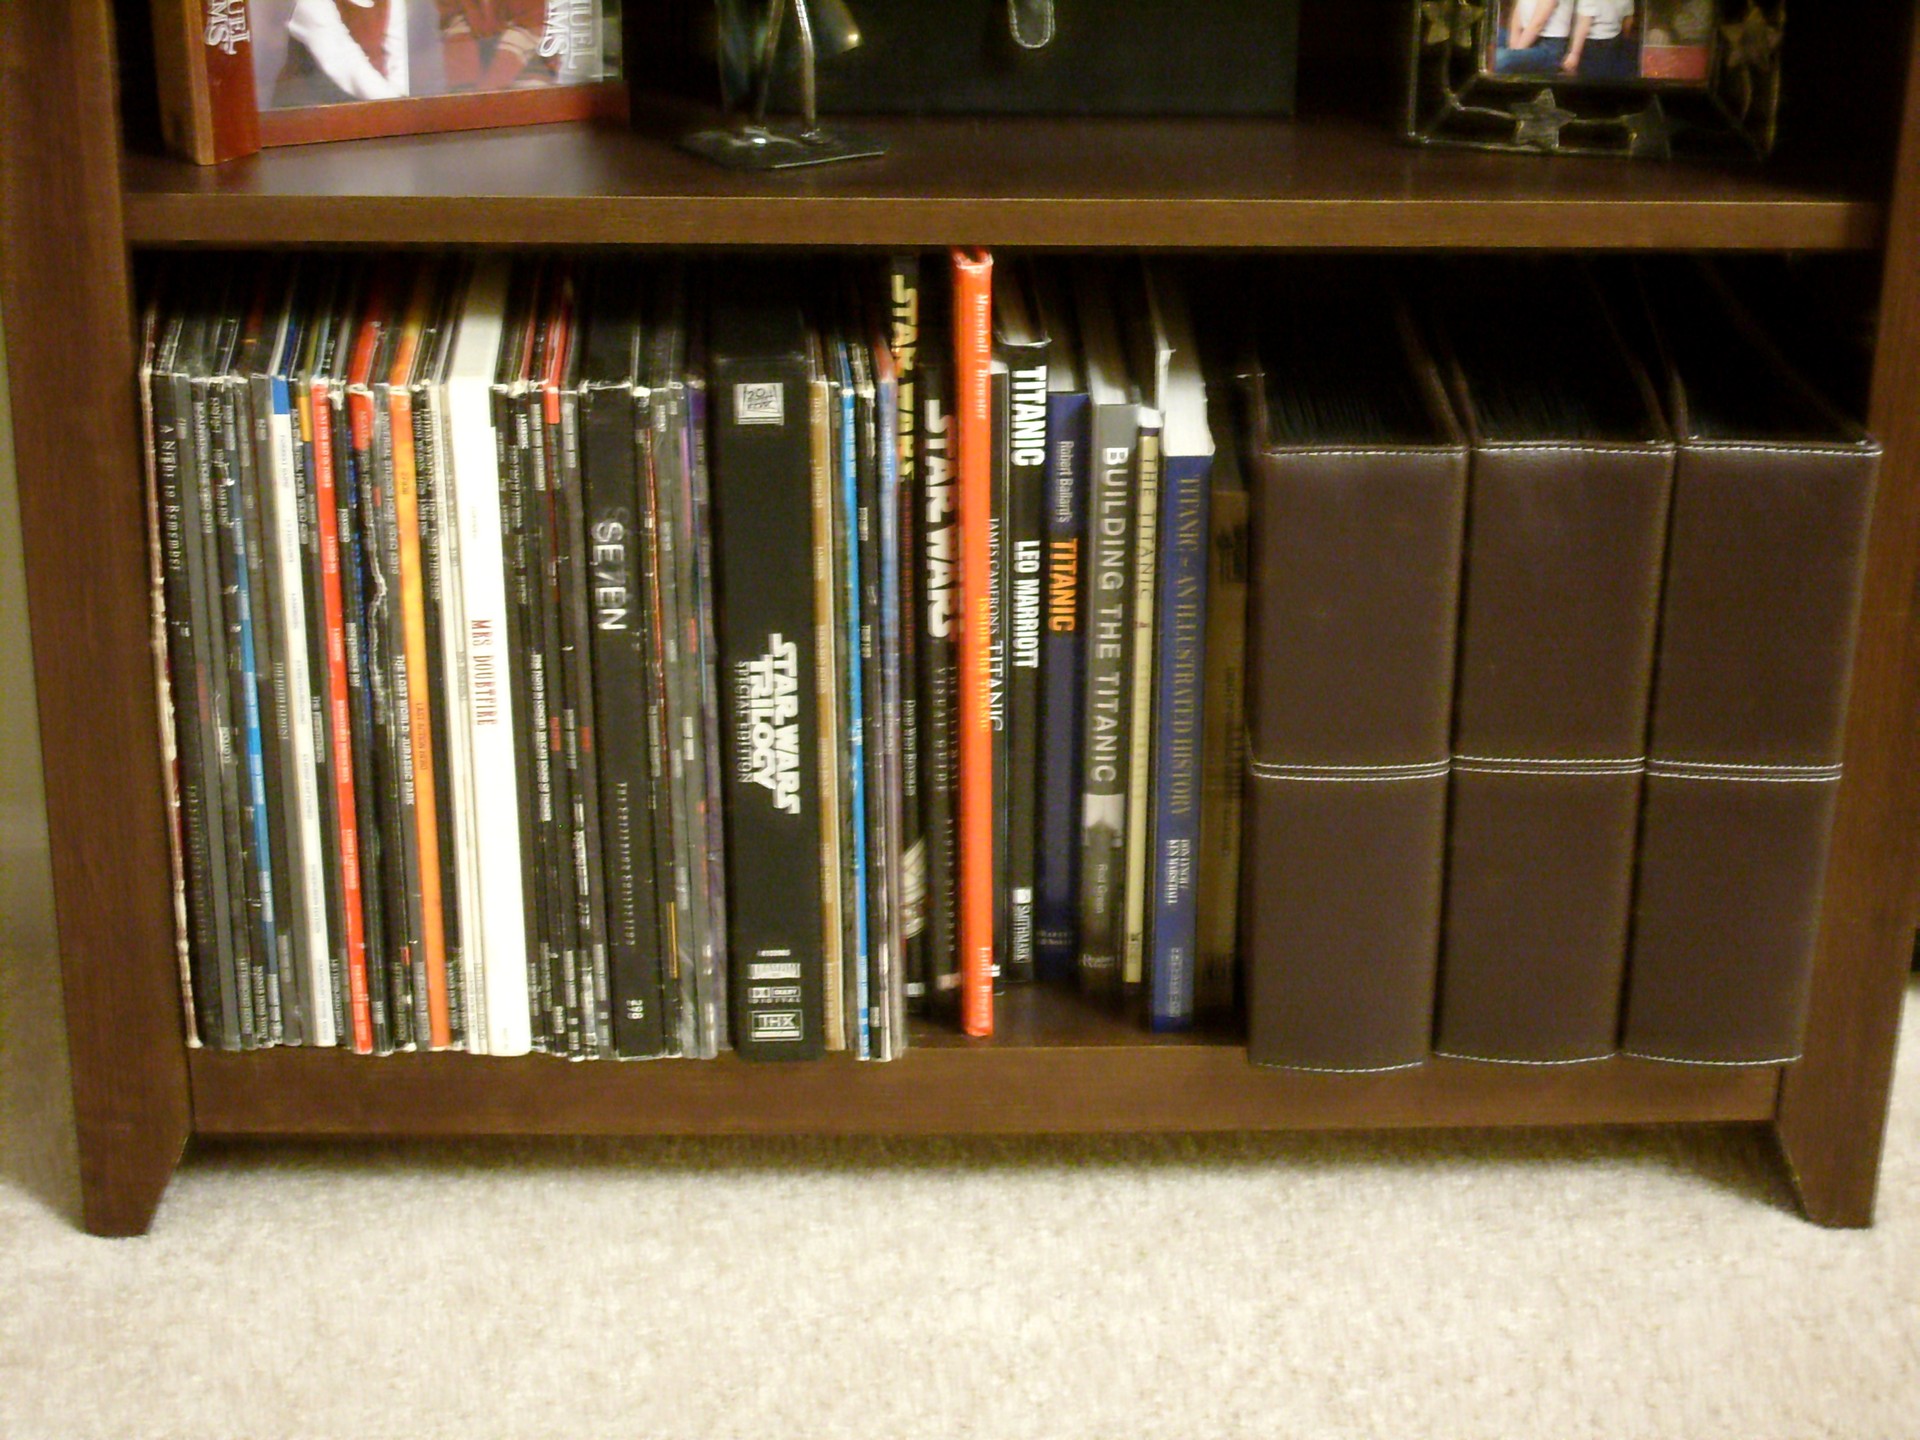 star wars criterion collection